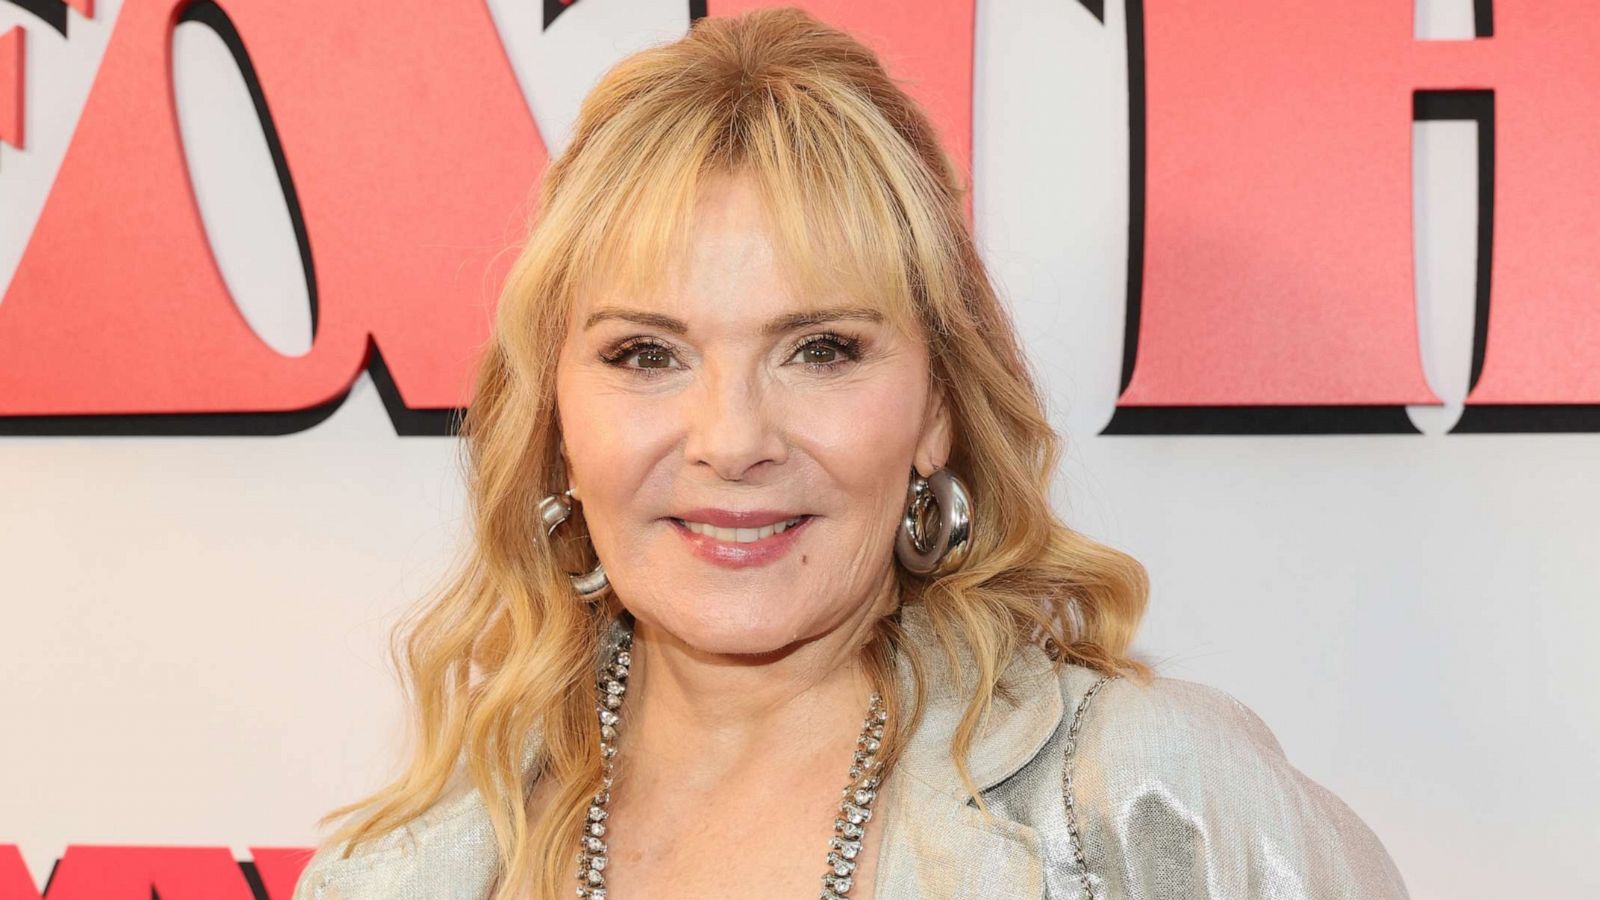 Kim Cattrall to reprise her role as Samantha Jones in season 2 of And Just Like That…